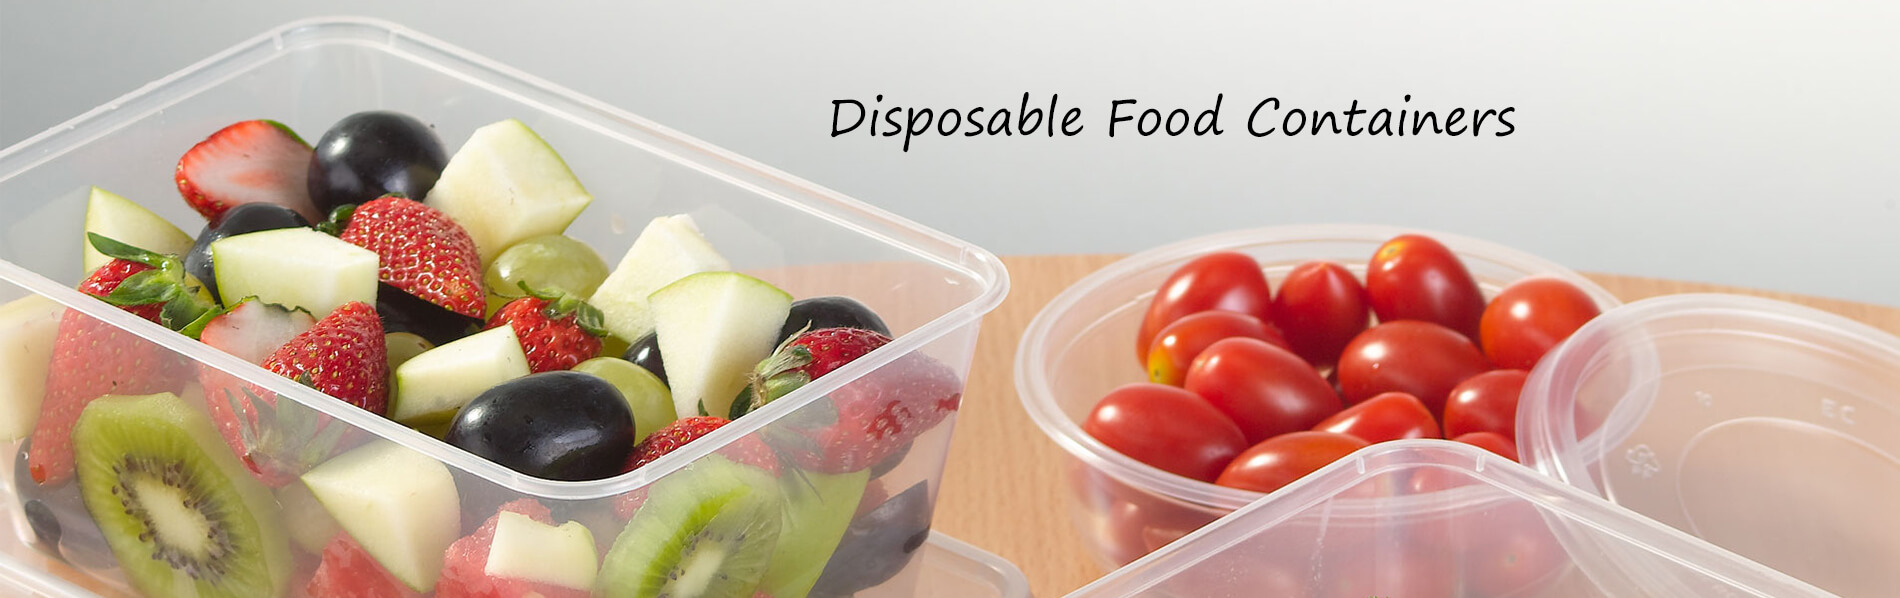 Plastic Disposable Food Containers